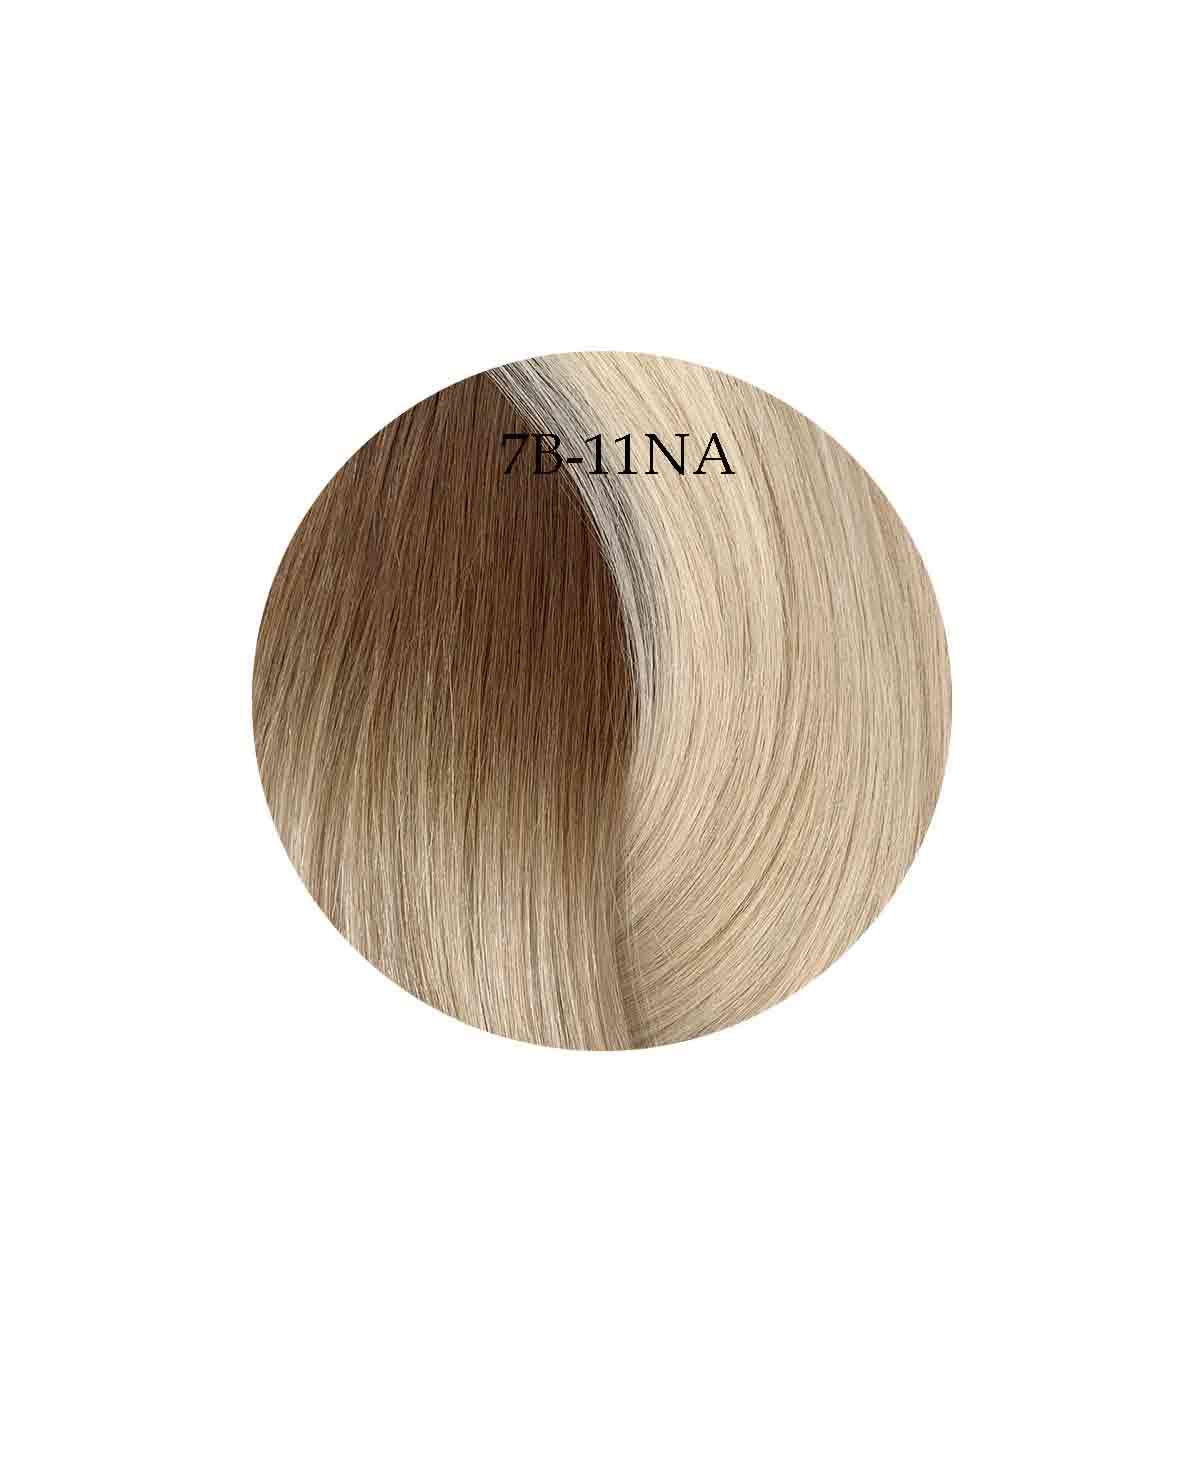 Showpony 45-50cm (20") 7 Piece Clip In Hair Extension - 7B-11NA Warm Salted Caramel Ombre